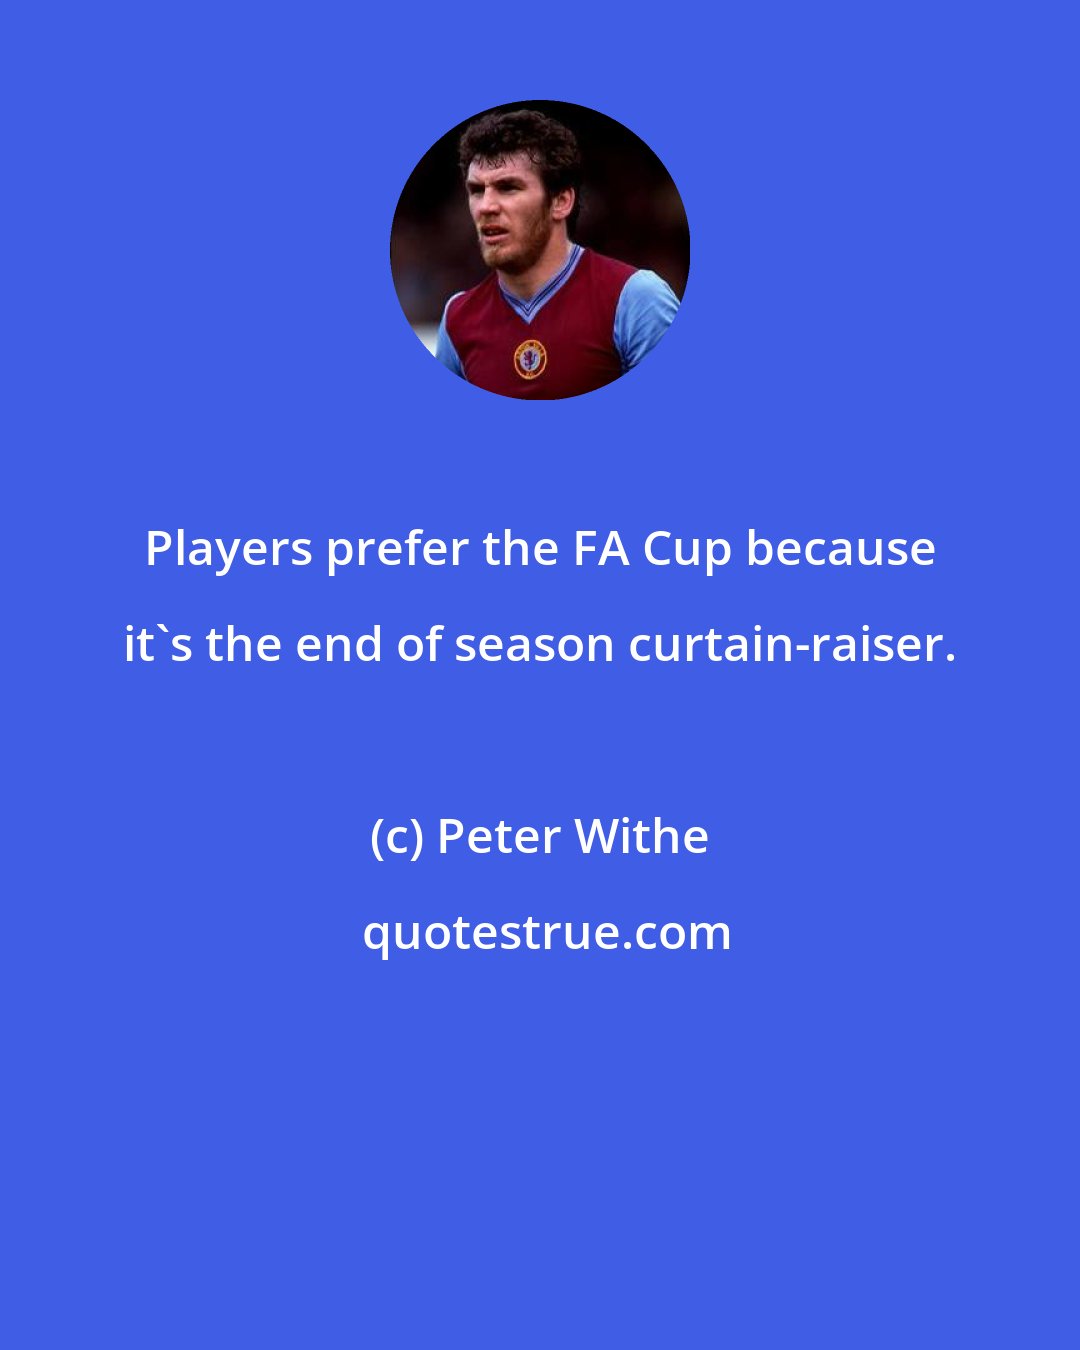 Peter Withe: Players prefer the FA Cup because it's the end of season curtain-raiser.